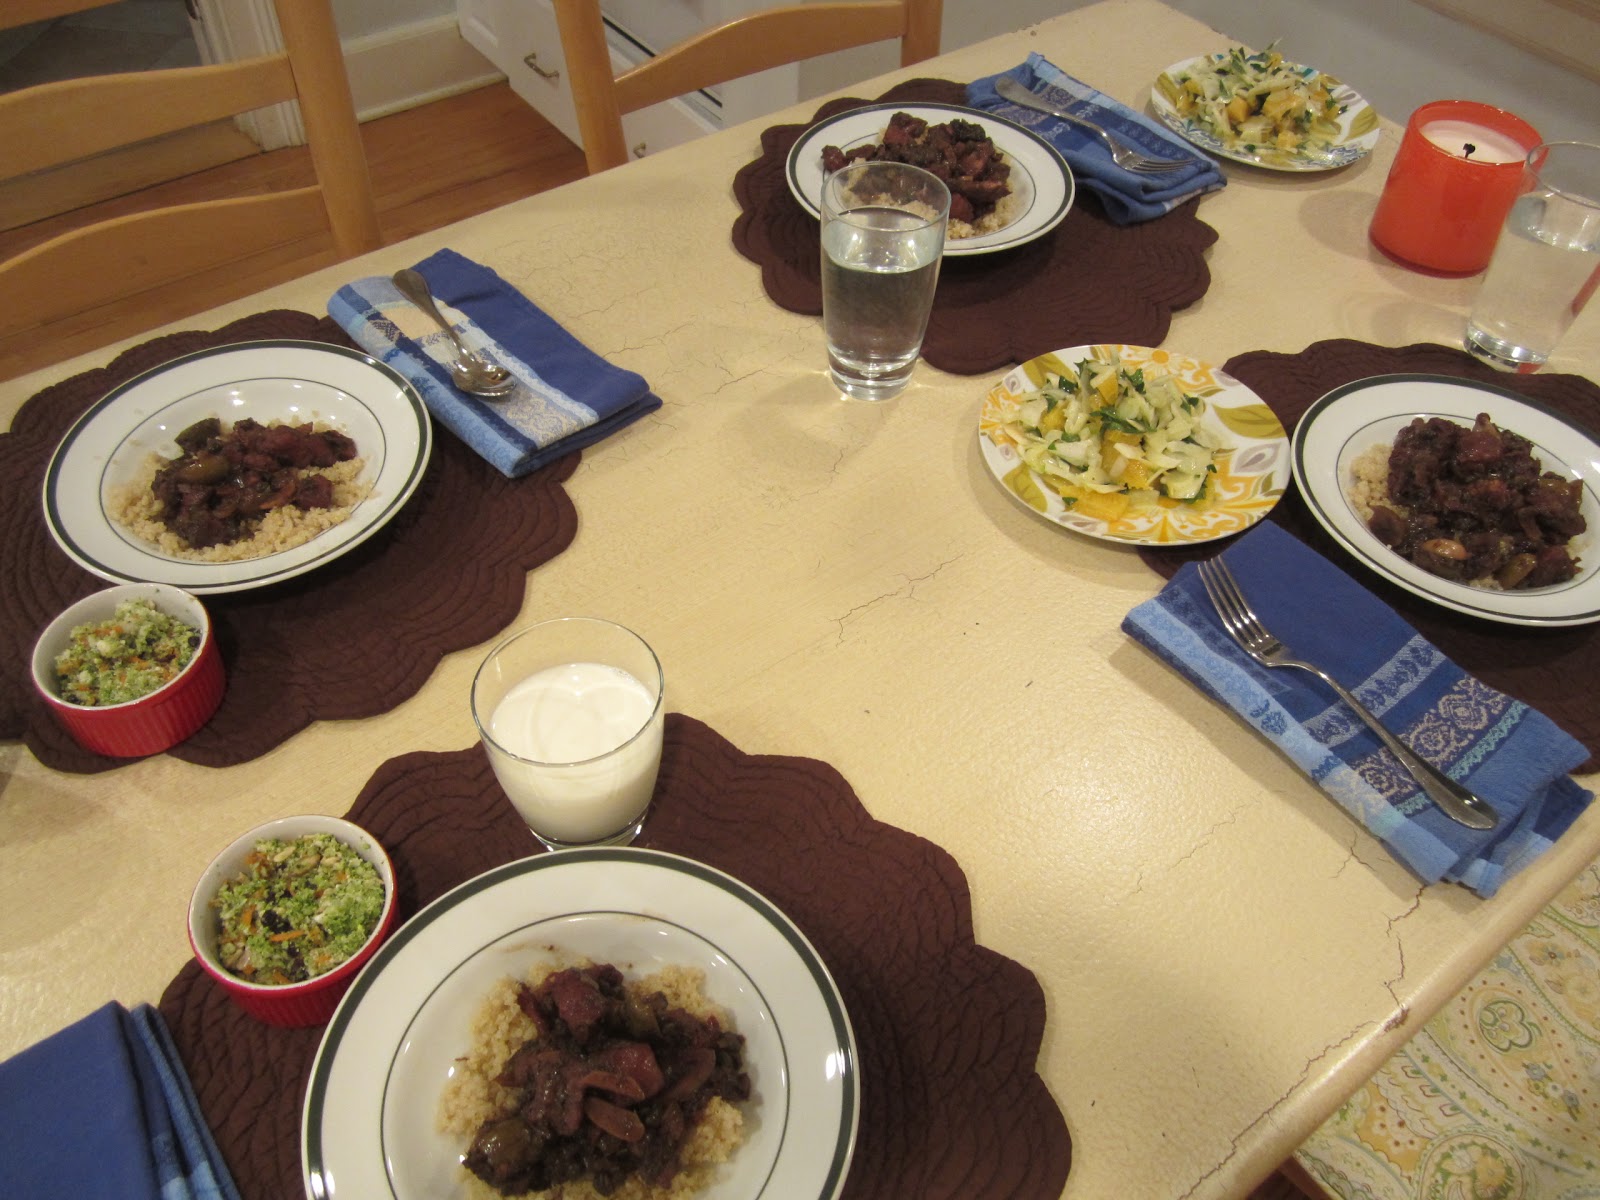 The Full Plate Blog: 2012 resolution #2: family dinner (at a set time)